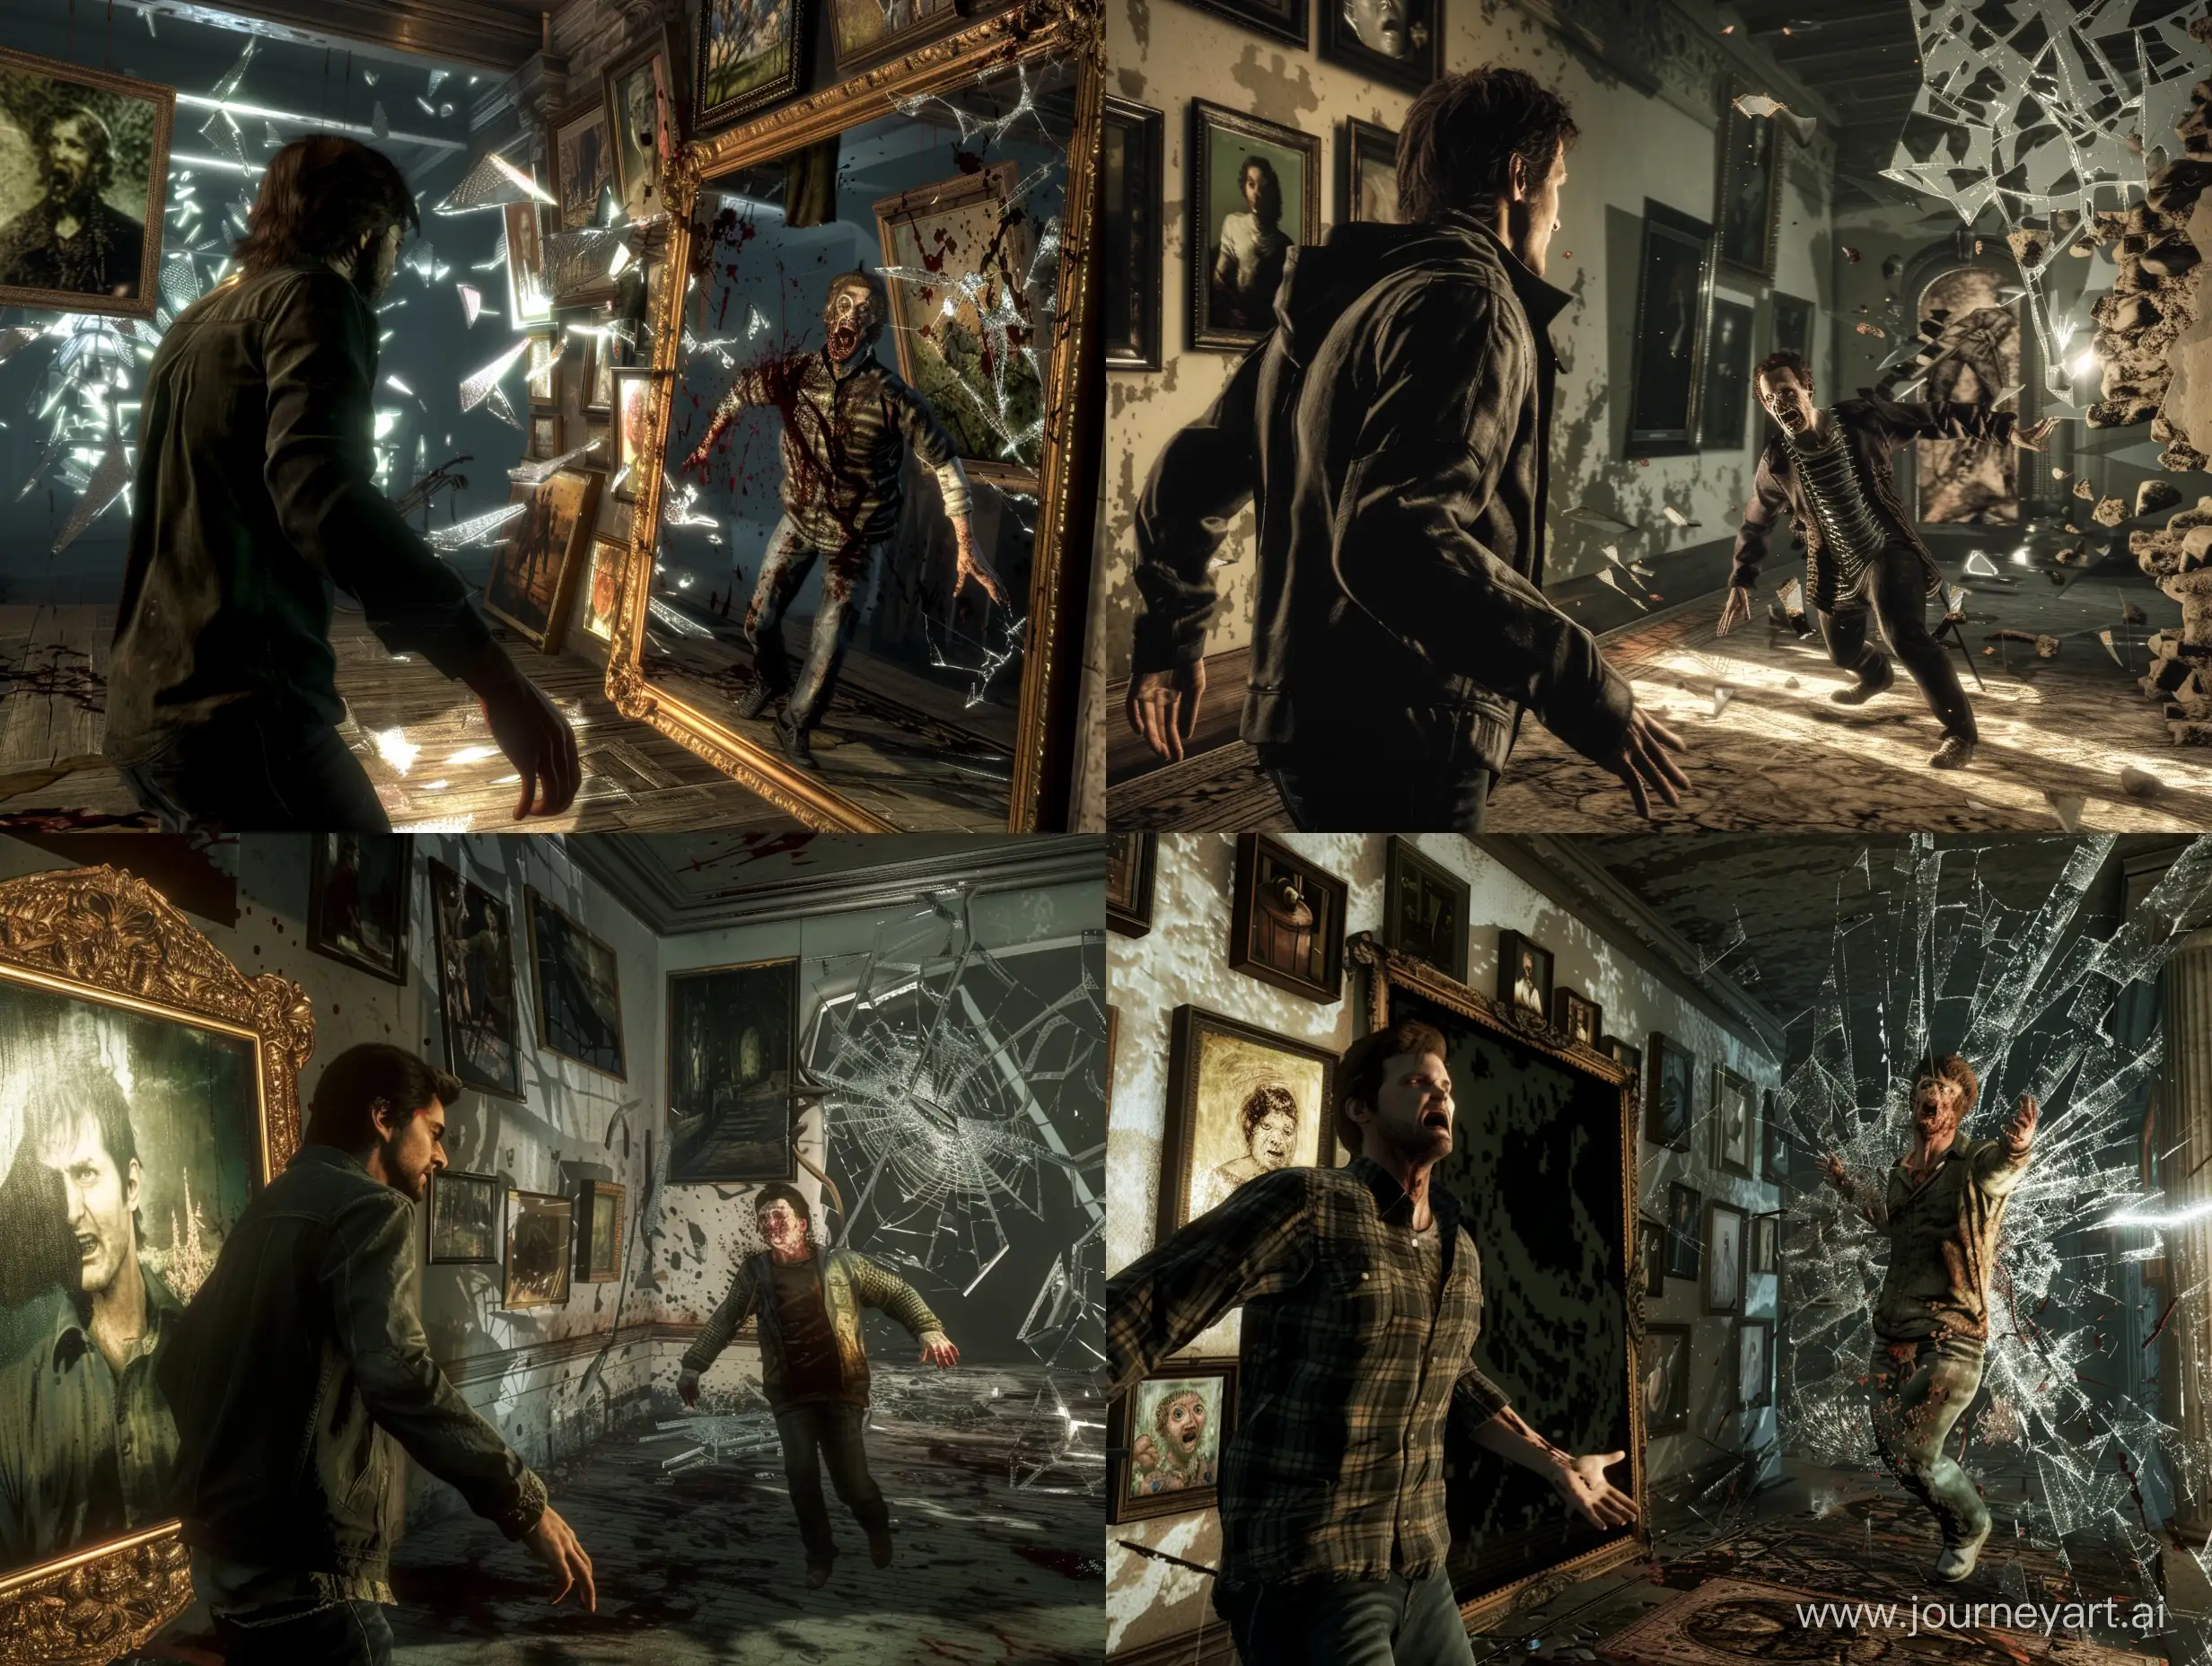 Alan-Wake-Remastered-Confrontation-with-Deranged-Man-in-Dimly-Lit-Room